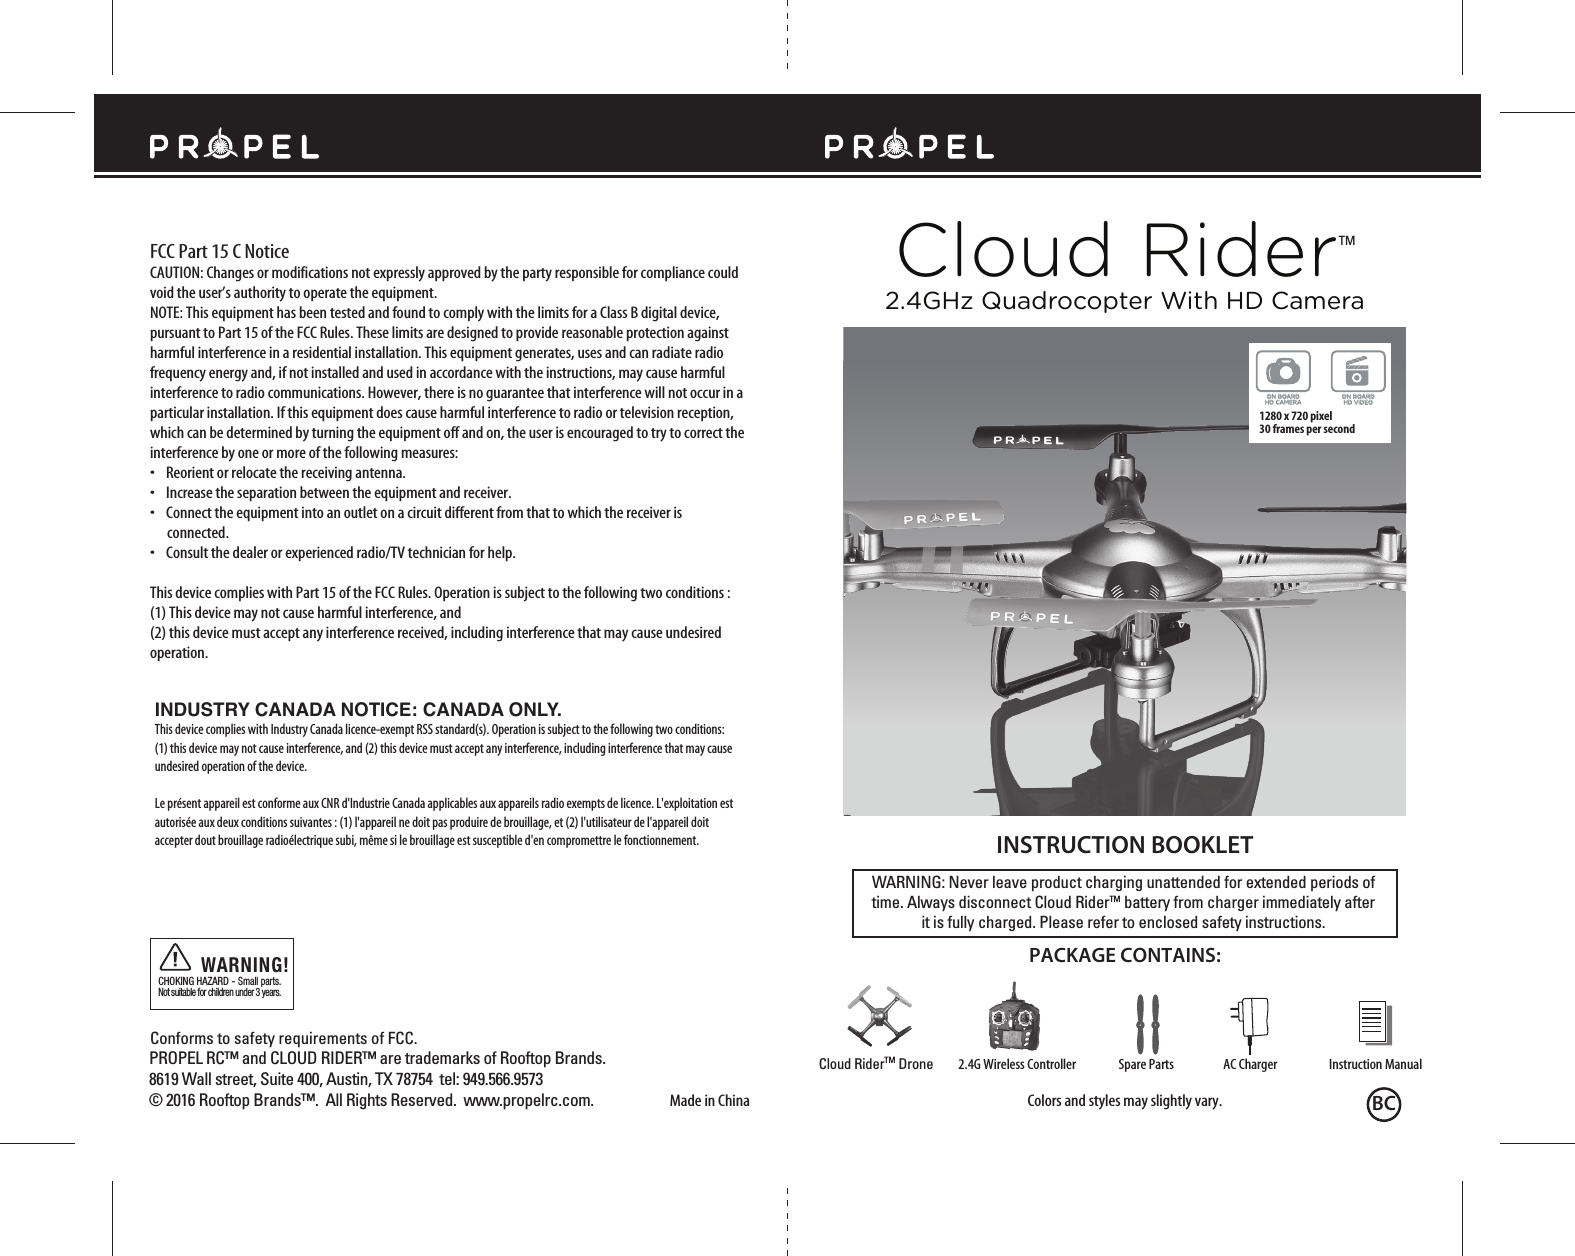 Cloud RiderTMMade in ChinaConforms to safety requirements of FCC. FCC Part 15 C NoticeCAUTION: Changes or modifications not expressly approved by the party responsible for compliance could void the user’s authority to operate the equipment.NOTE: This equipment has been tested and found to comply with the limits for a Class B digital device, pursuant to Part 15 of the FCC Rules. These limits are designed to provide reasonable protection against harmful interference in a residential installation. This equipment generates, uses and can radiate radio frequency energy and, if not installed and used in accordance with the instructions, may cause harmful interference to radio communications. However, there is no guarantee that interference will not occur in a particular installation. If this equipment does cause harmful interference to radio or television reception, which can be determined by turning the equipment off and on, the user is encouraged to try to correct the interference by one or more of the following measures:•    Reorient or relocate the receiving antenna.•    Increase the separation between the equipment and receiver.•    Connect the equipment into an outlet on a circuit different from that to which the receiver is       connected.•    Consult the dealer or experienced radio/TV technician for help.This device complies with Part 15 of the FCC Rules. Operation is subject to the following two conditions : (1) This device may not cause harmful interference, and(2) this device must accept any interference received, including interference that may cause undesired operation.CHOKING HAZARD - Small parts. Not suitable for children under 3 years.WARNING!WARNING: Never leave product charging unattended for extended periods of time. Always disconnect Cloud RiderTM battery from charger immediately after it is fully charged. Please refer to enclosed safety instructions.INSTRUCTION BOOKLETColors and styles may slightly vary.PACKAGE CONTAINS:2.4G Wireless Controller Instruction ManualSpare Parts AC ChargerCloud RiderTM Drone2.4GHz Quadrocopter With HD CameraINDUSTRY CANADA NOTICE: CANADA ONLY.This device complies with Industry Canada licence-exempt RSS standard(s). Operation is subject to the following two conditions: (1) this device may not cause interference, and (2) this device must accept any interference, including interference that may cause undesired operation of the device.Le présent appareil est conforme aux CNR d&apos;Industrie Canada applicables aux appareils radio exempts de licence. L&apos;exploitation est autorisée aux deux conditions suivantes : (1) l&apos;appareil ne doit pas produire de brouillage, et (2) l&apos;utilisateur de l&apos;appareil doit accepter dout brouillage radioélectrique subi, même si le brouillage est susceptible d&apos;en compromettre le fonctionnement.ON BOARDHD VIDEOON BOARDHD CAMERA1280 x 720 pixel 30 frames per secondPROPEL RC™ and CLOUD RIDER™ are trademarks of Rooftop Brands.8619 Wall street, Suite 400, Austin, TX 78754  tel: 949.566.9573  © 2016 Rooftop Brands™.  All Rights Reserved.  www.propelrc.com. BC